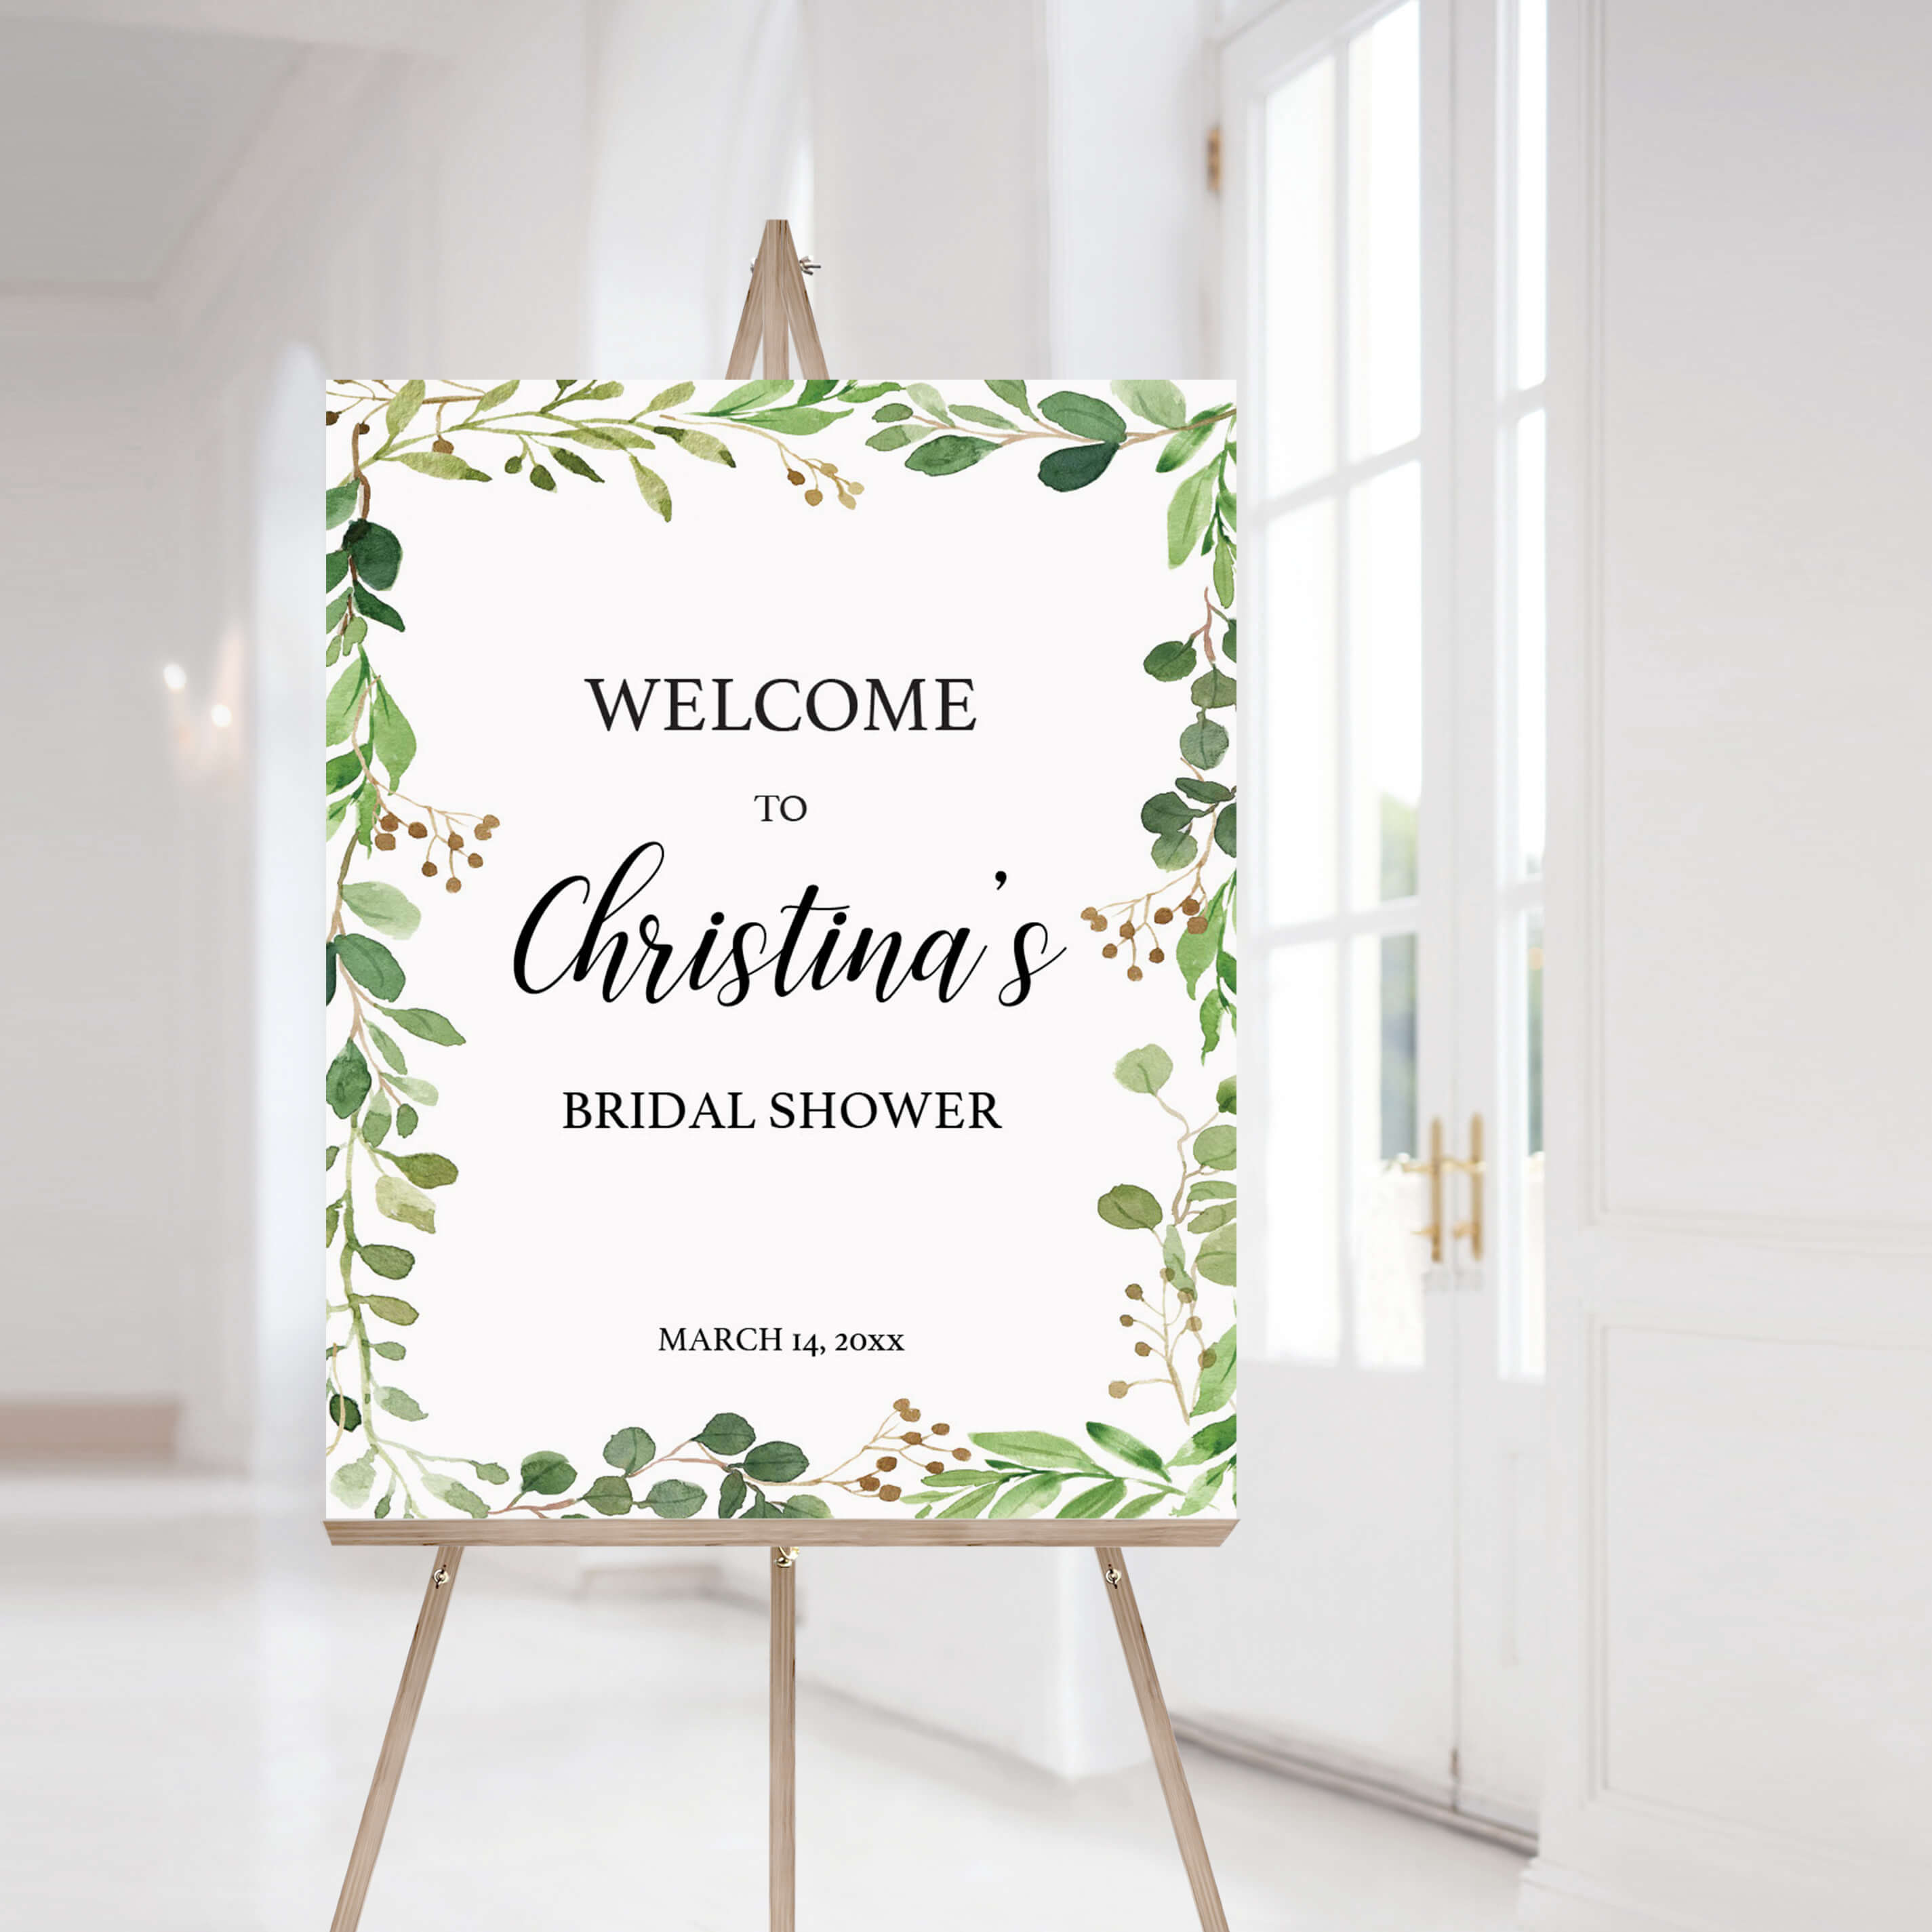 Watercolor Leaves Bridal Shower Welcome Board Template DIY by LittleSizzle